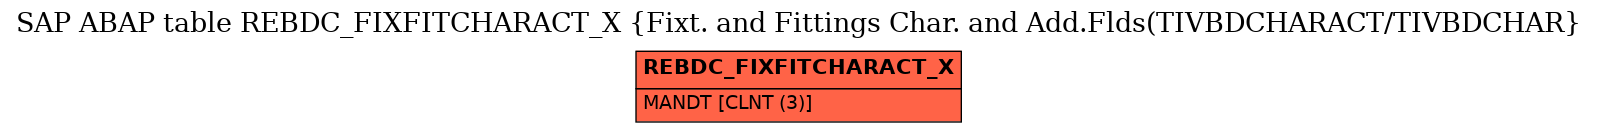 E-R Diagram for table REBDC_FIXFITCHARACT_X (Fixt. and Fittings Char. and Add.Flds(TIVBDCHARACT/TIVBDCHAR)